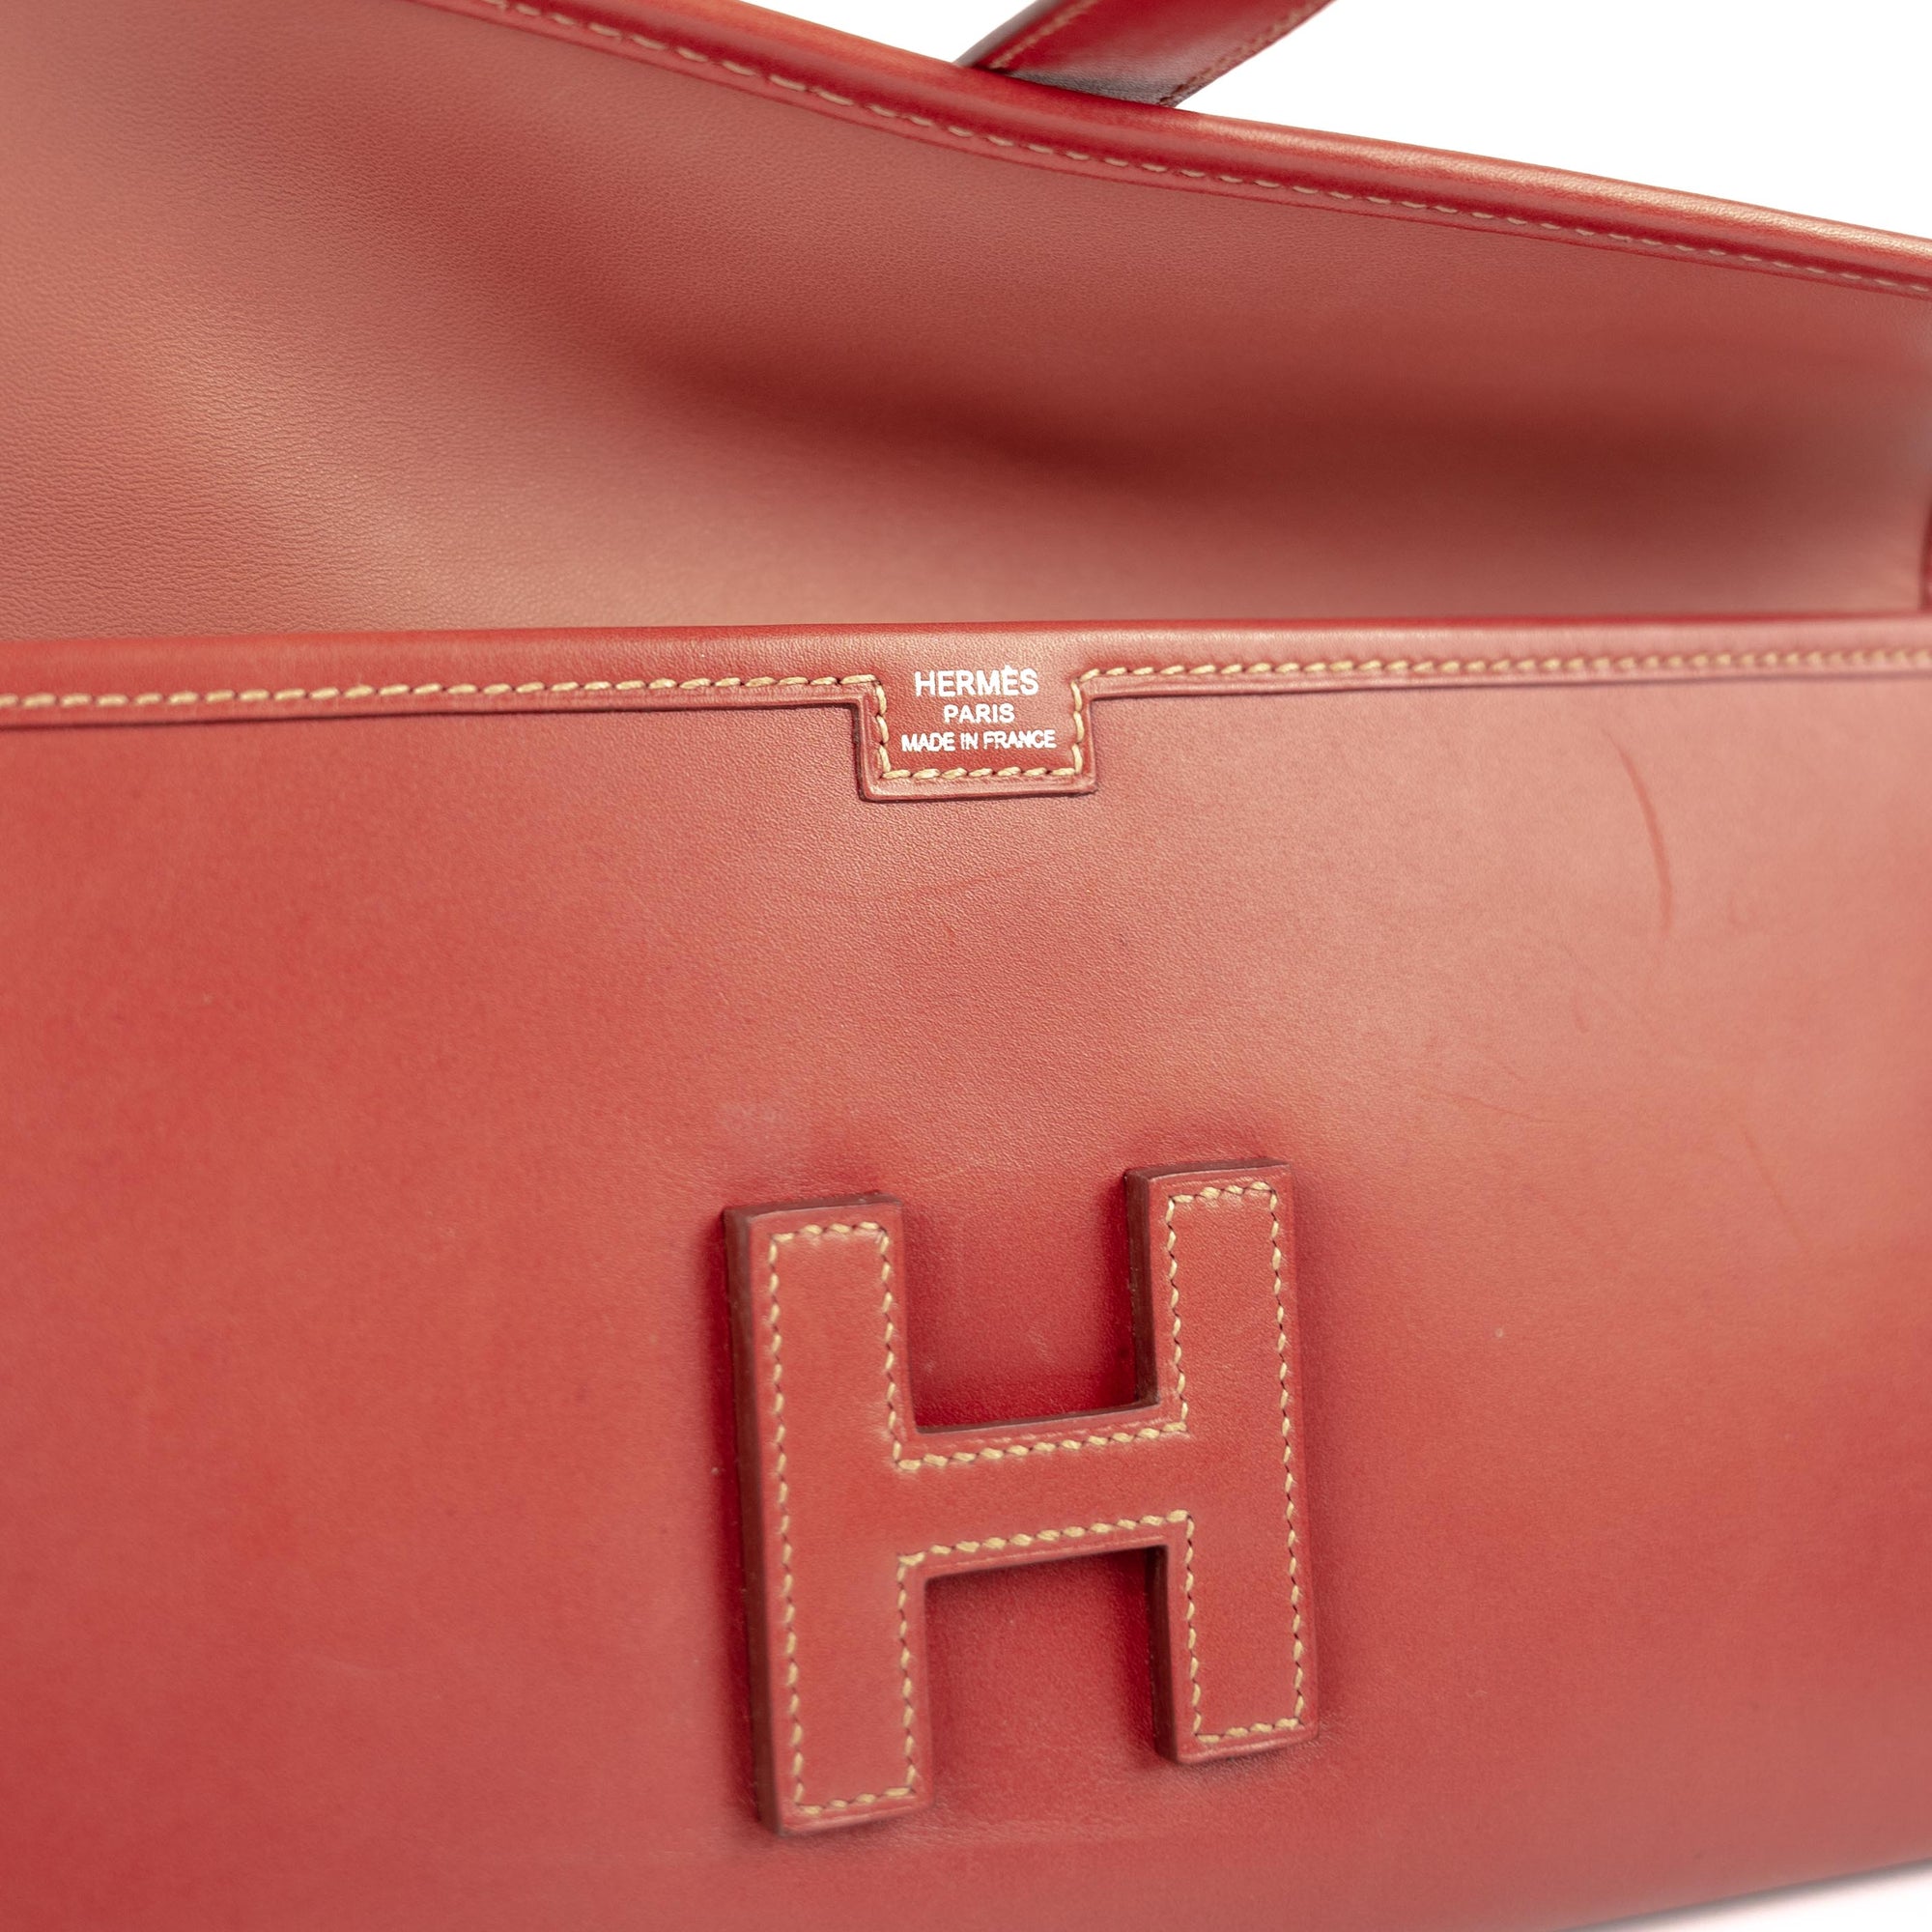 HERMES, Red leather clutch bag model JIGE, marked on the…